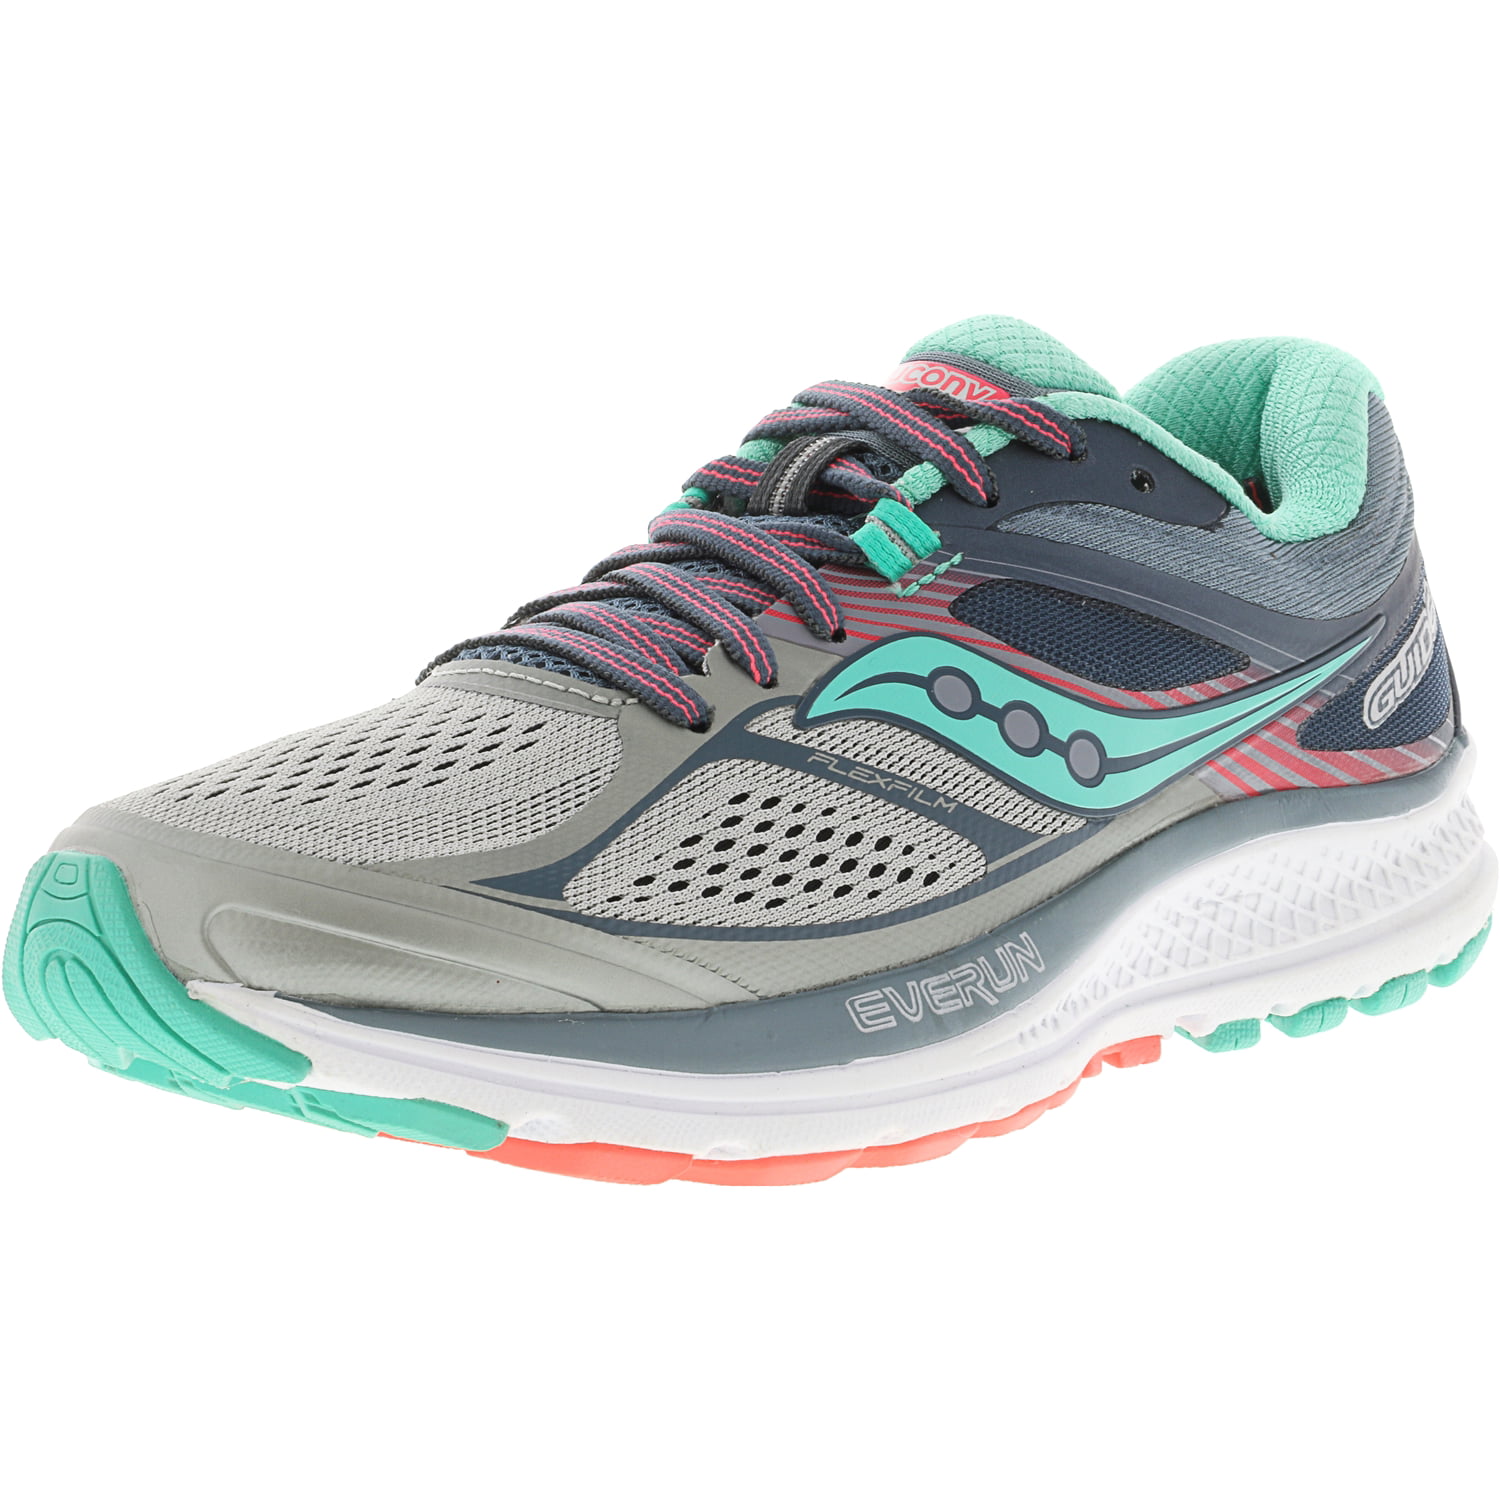 saucony guide 10 womens size 10.5